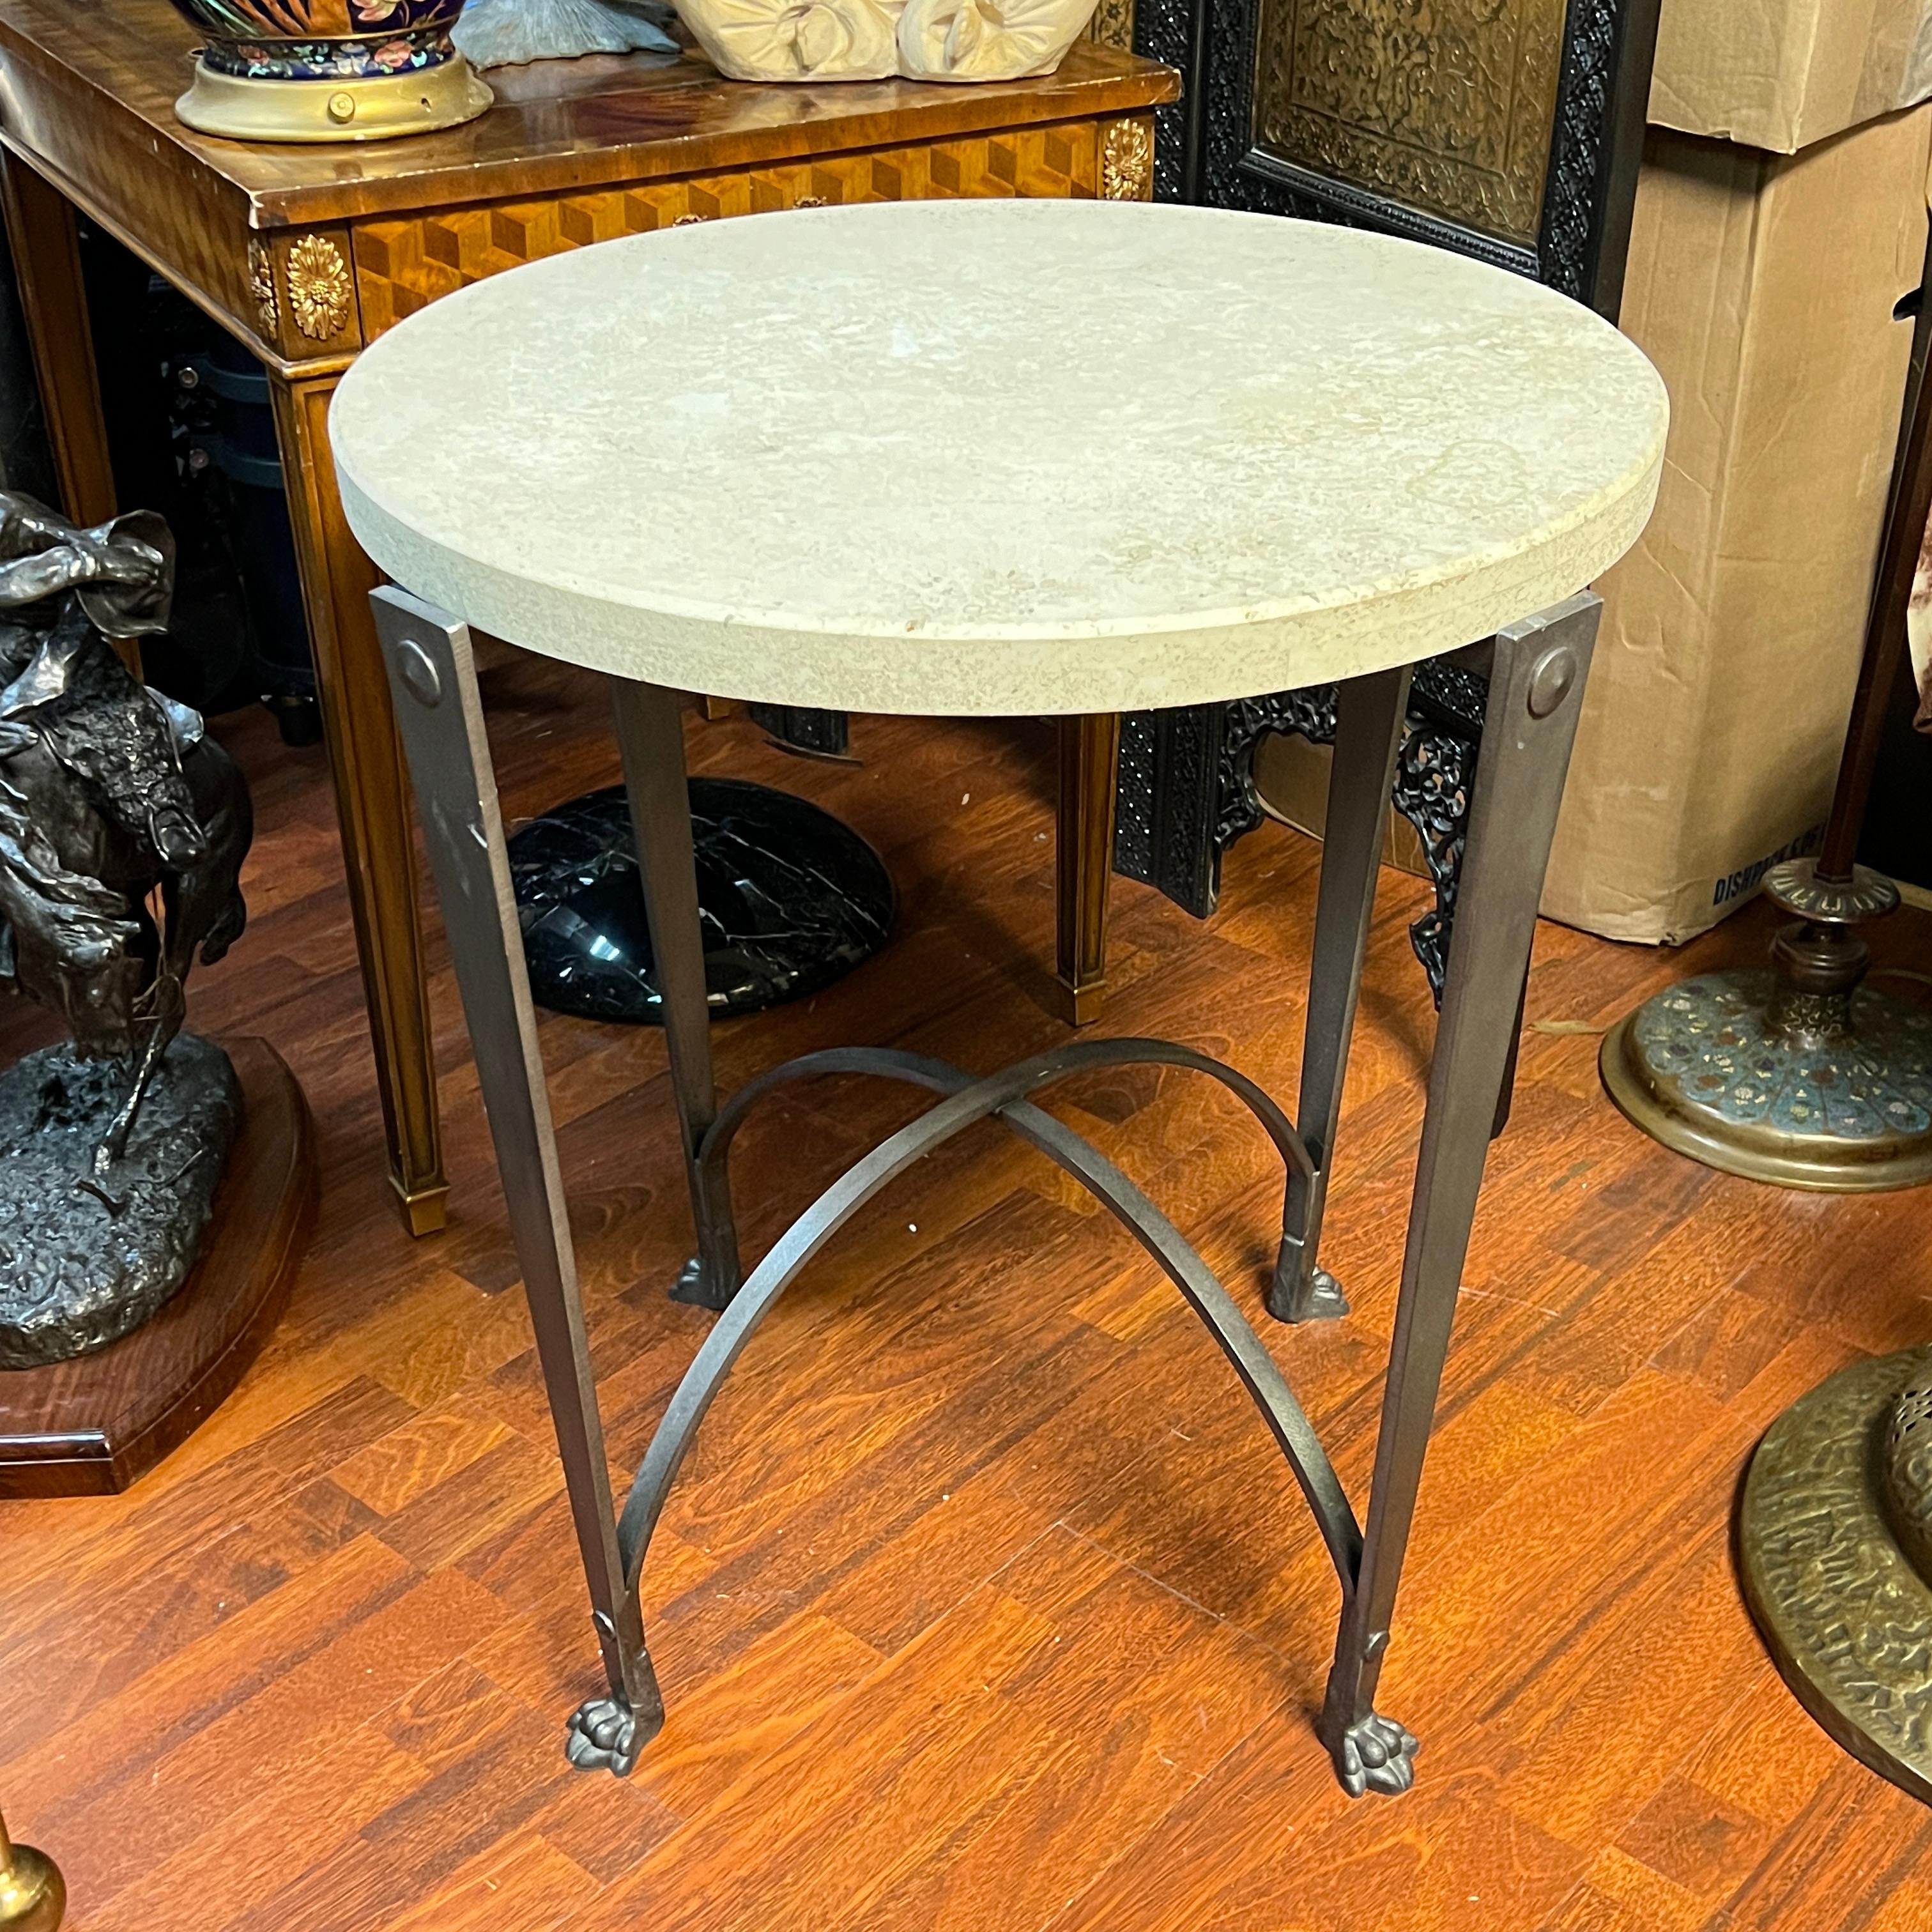 Vintage Circular Iron Side Table with Travertine Stone Top For Sale 3